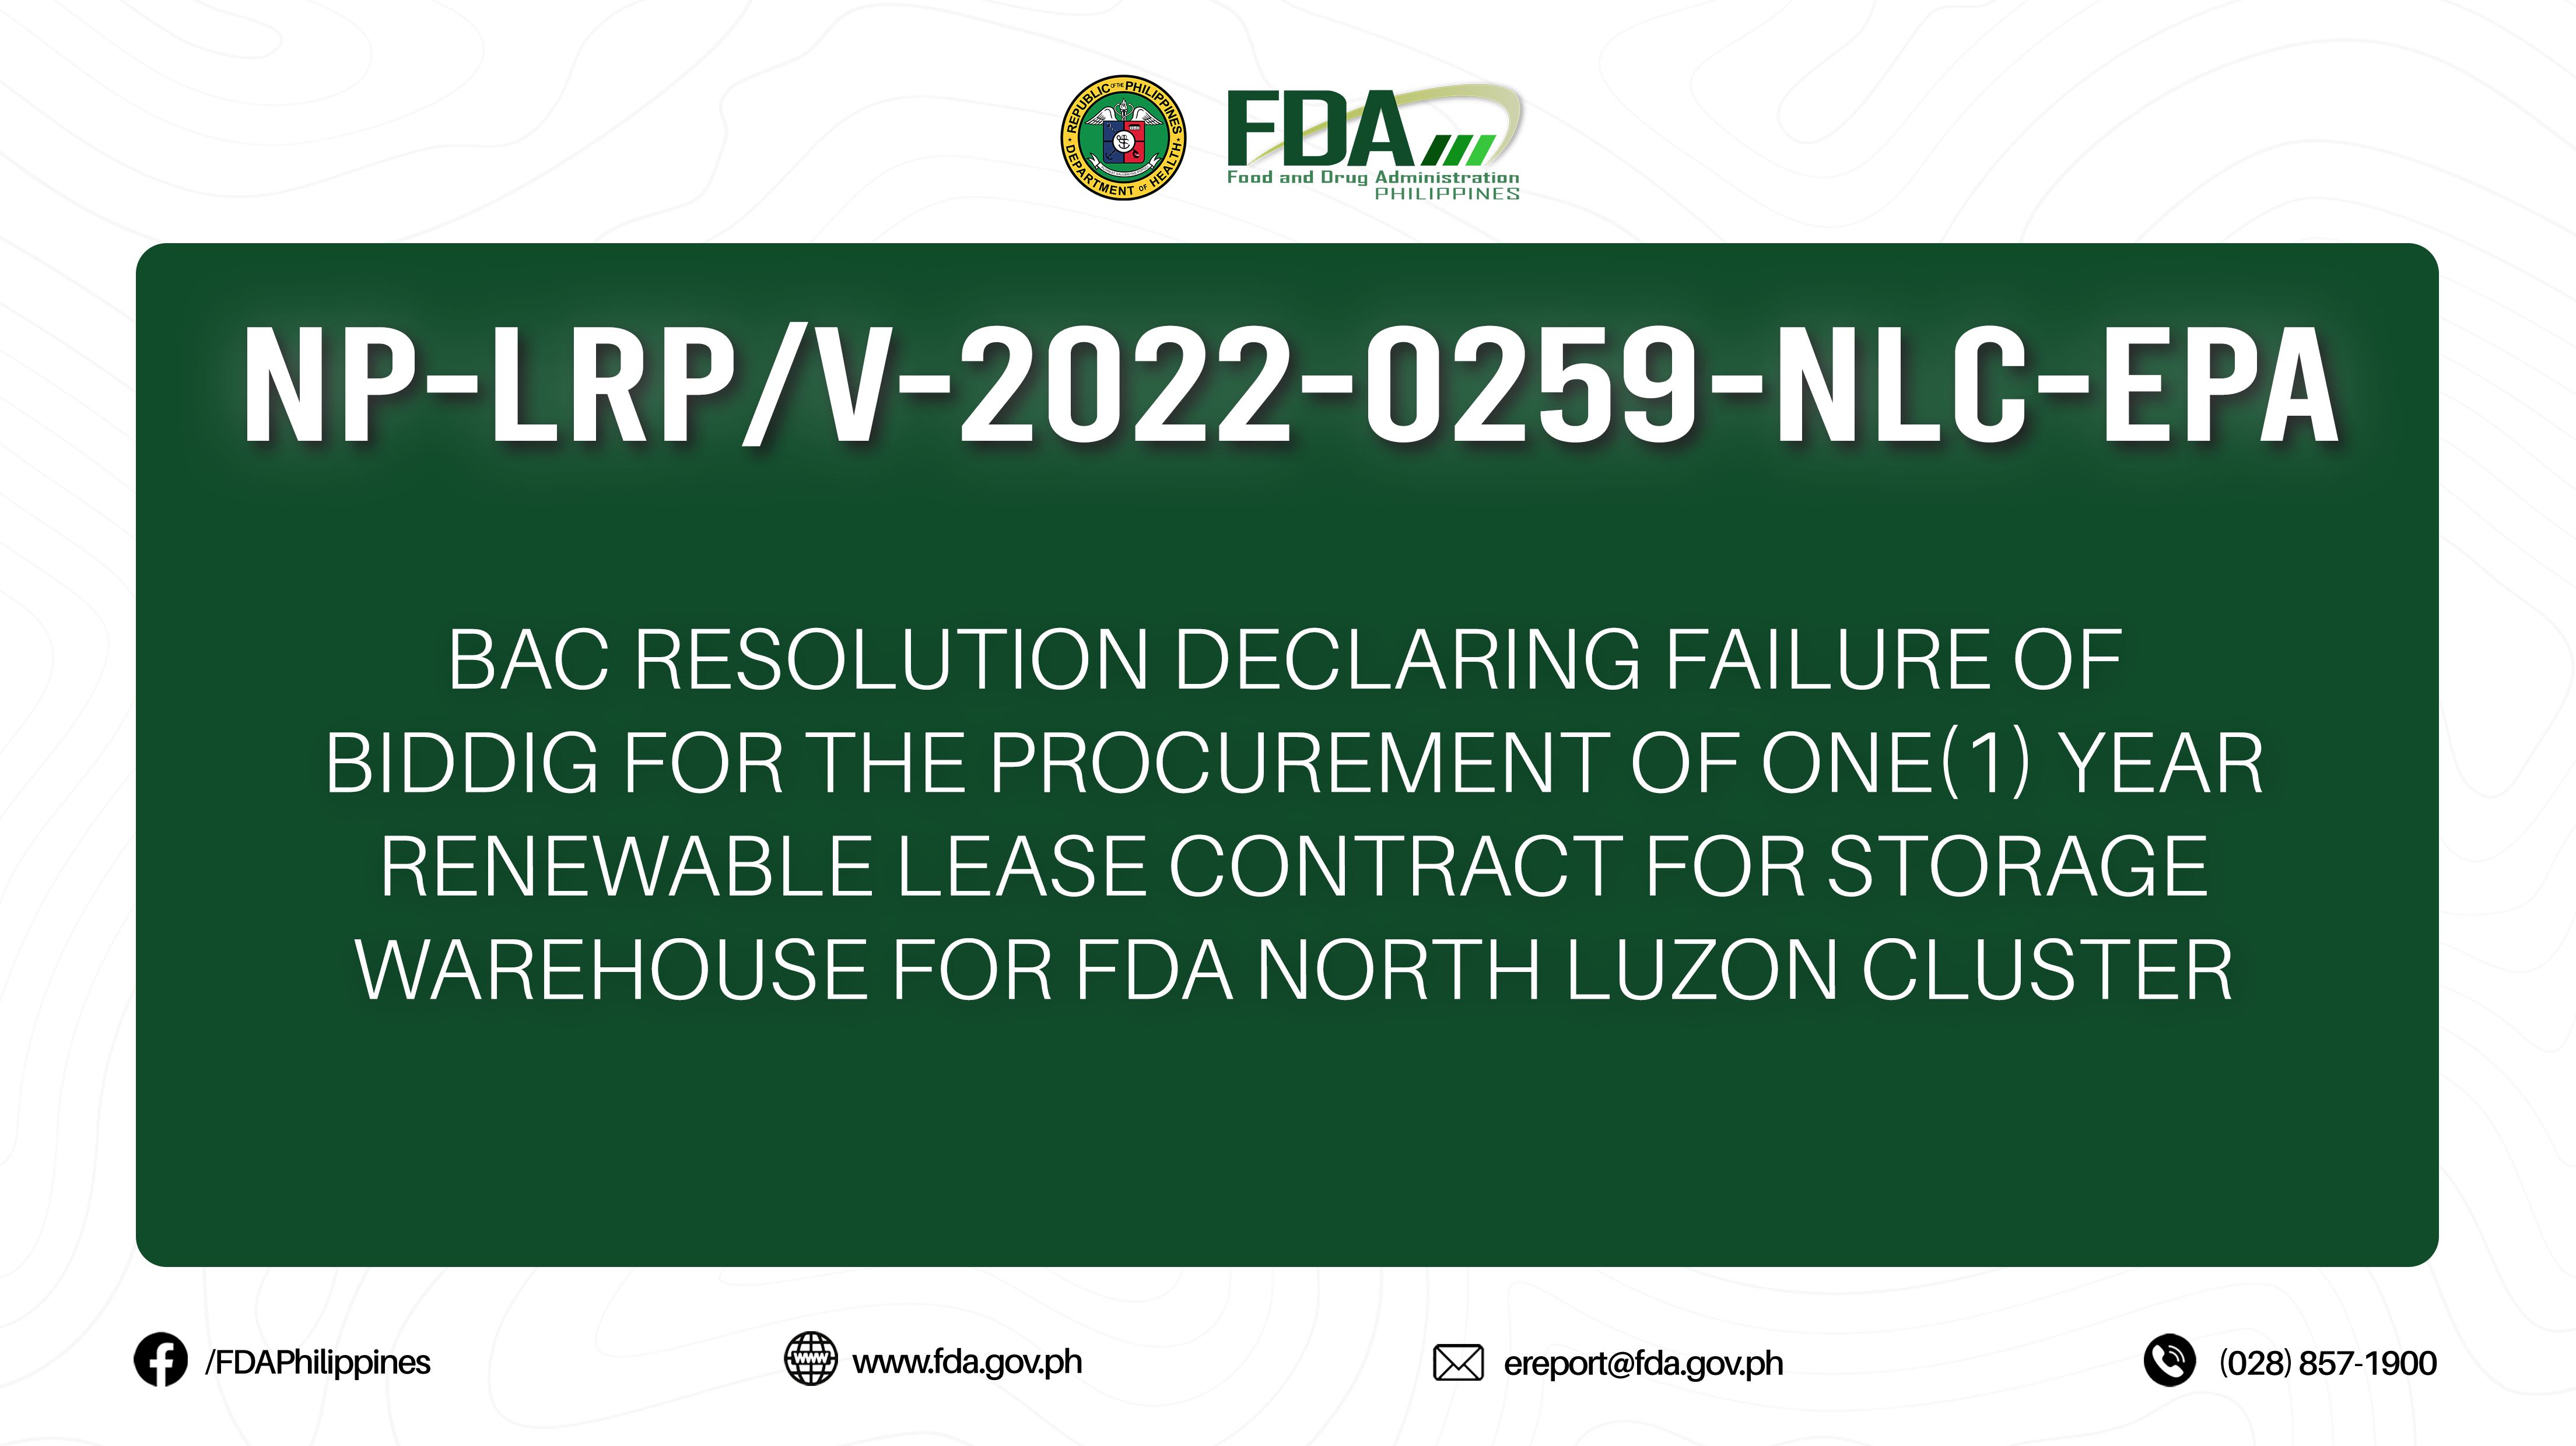 NP-LRP/V-2022-0259-NLC-EPA || BAC RESOLUTION DECLARING FAILURE OF BIDDIG FOR THE PROCUREMENT OF ONE(1) YEAR RENEWABLE LEASE CONTRACT FOR STORAGE WAREHOUSE FOR FDA NORTH LUZON CLUSTER